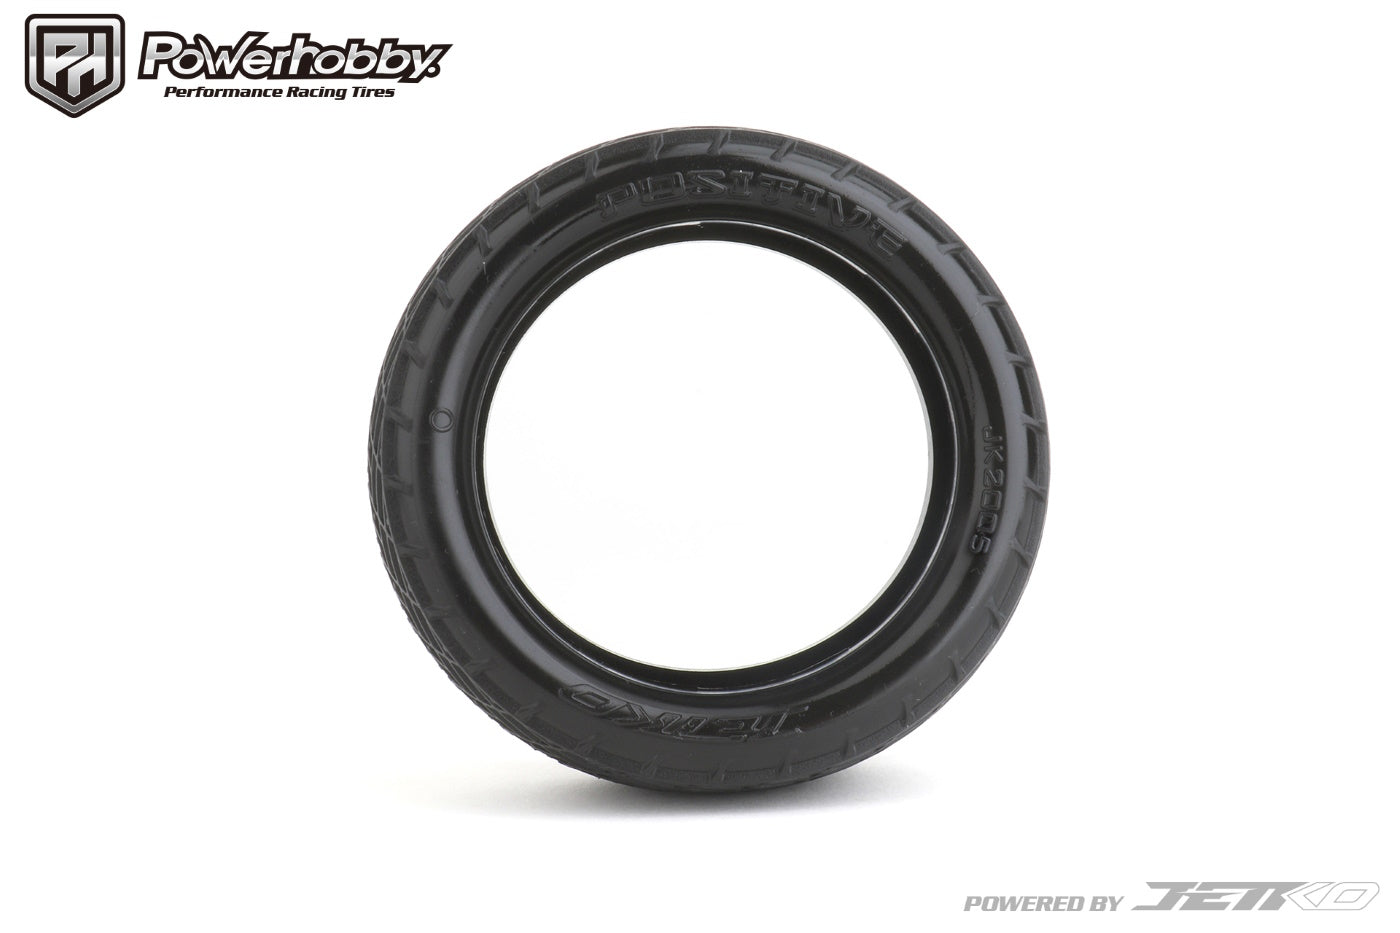 Powerhobby Positive 1/10 2WD Buggy Front Clay Tires Super Soft - PowerHobby